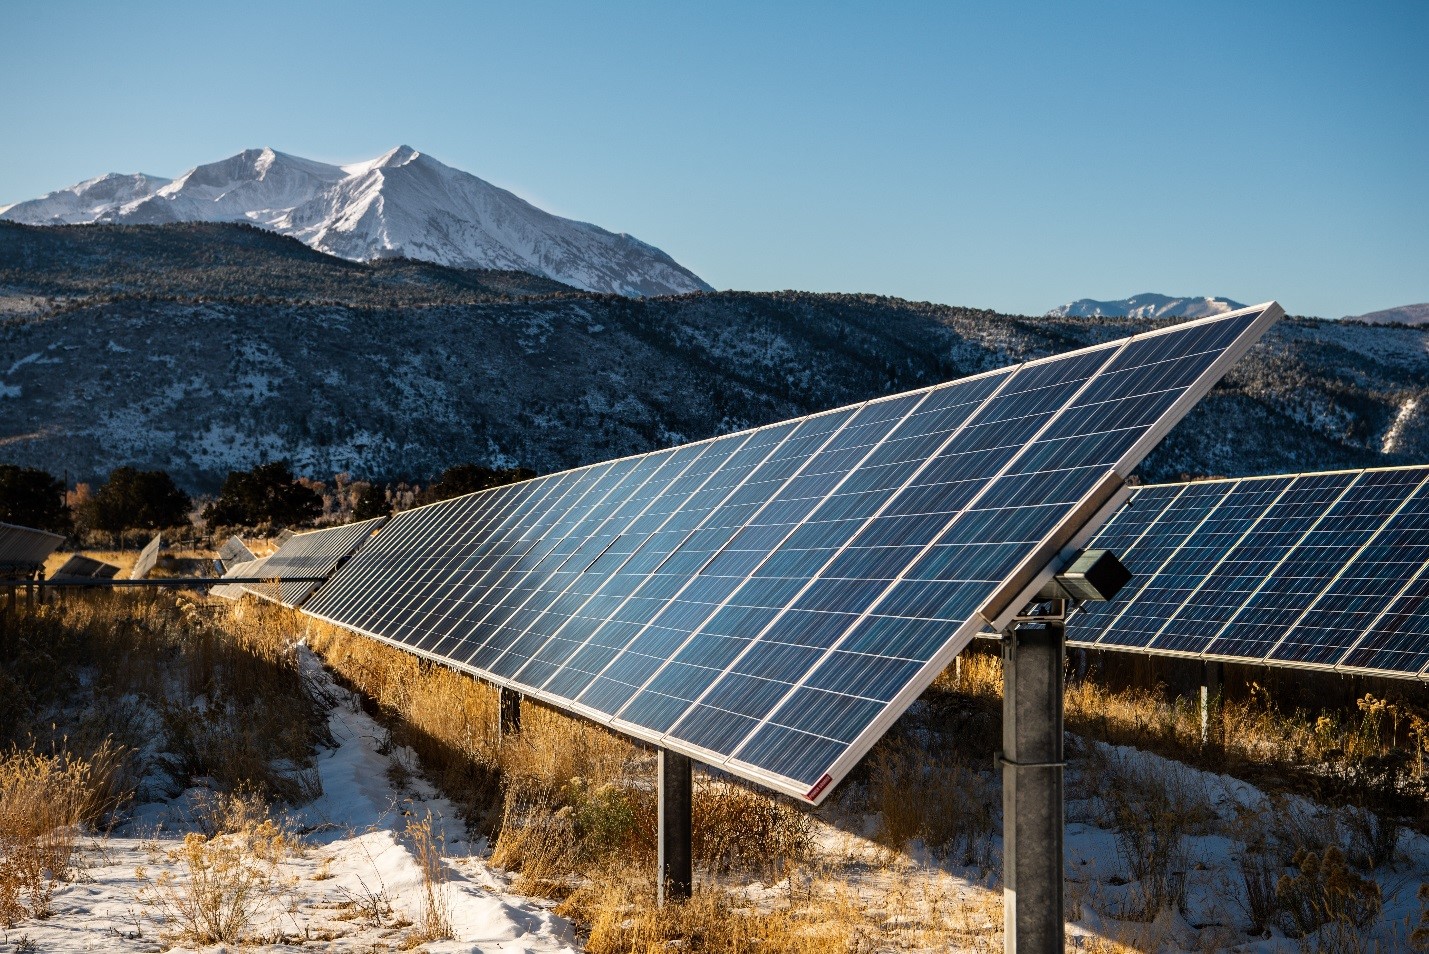 Request for Information: The greatest challenges to equitable distribution of solar energy